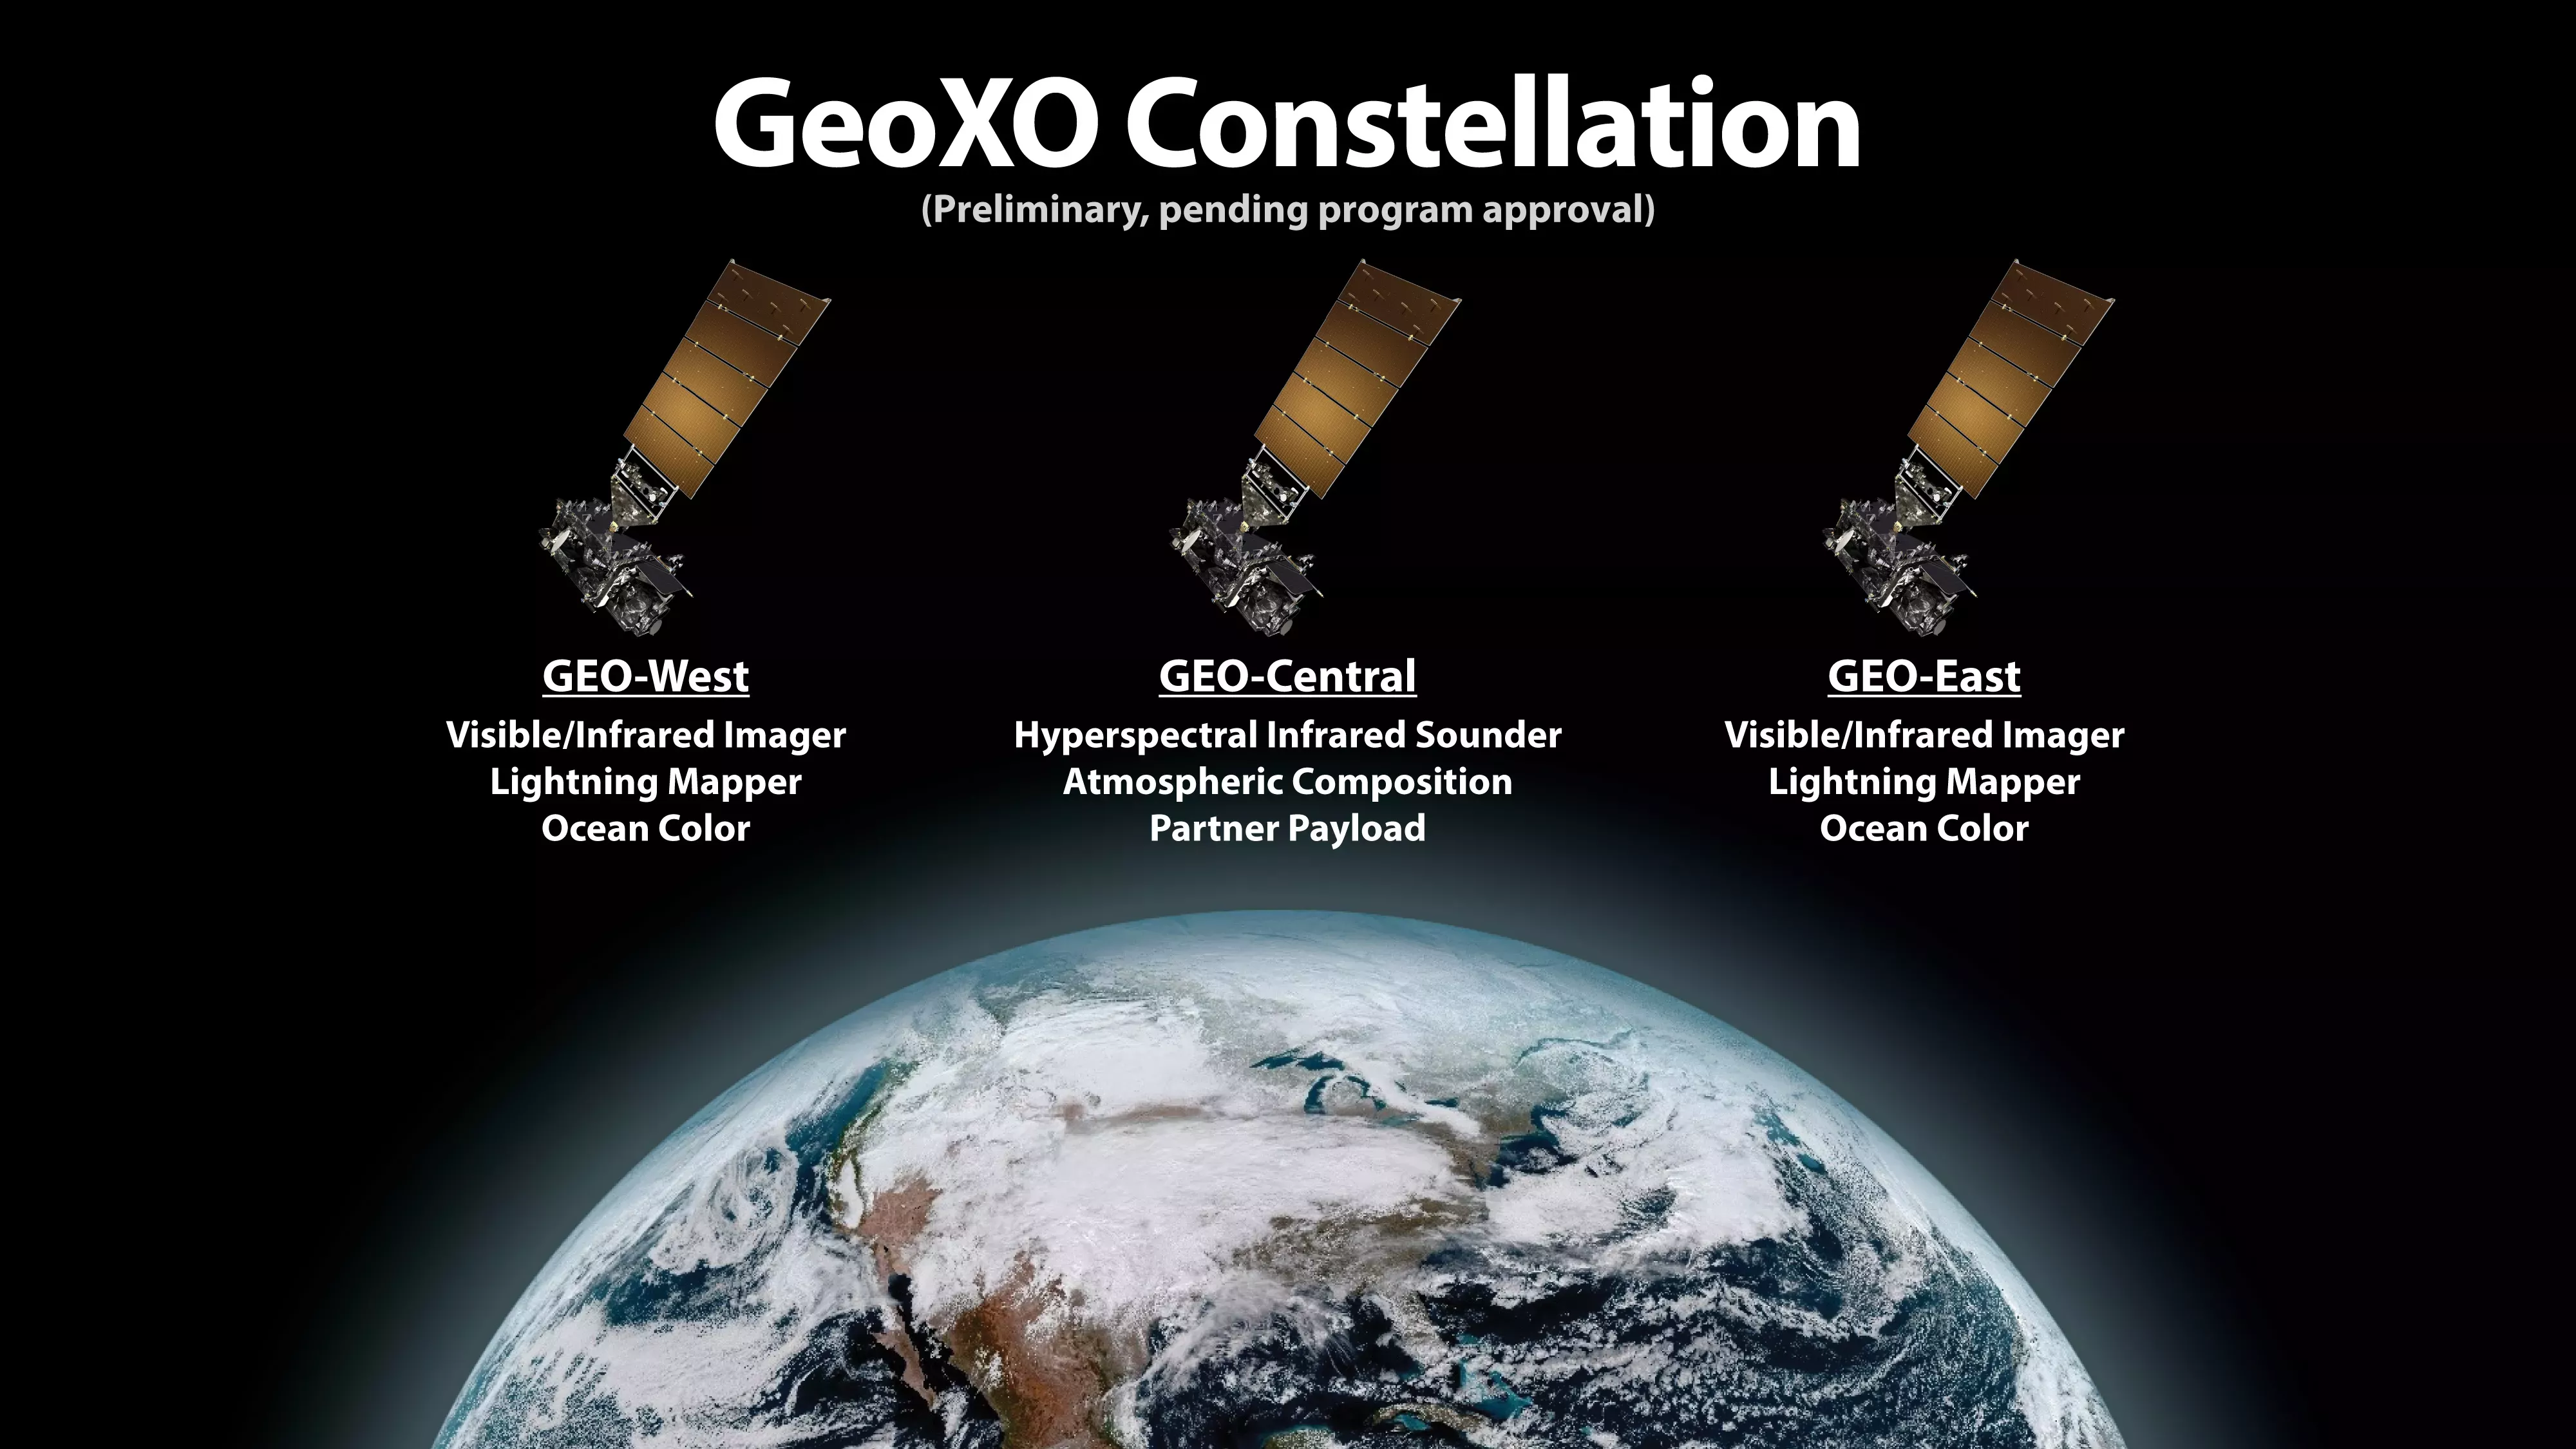 An artist's rendering of the GeoXO Constellation, including GEO-West, GEO-Central and GEO-East (pending program approval). 